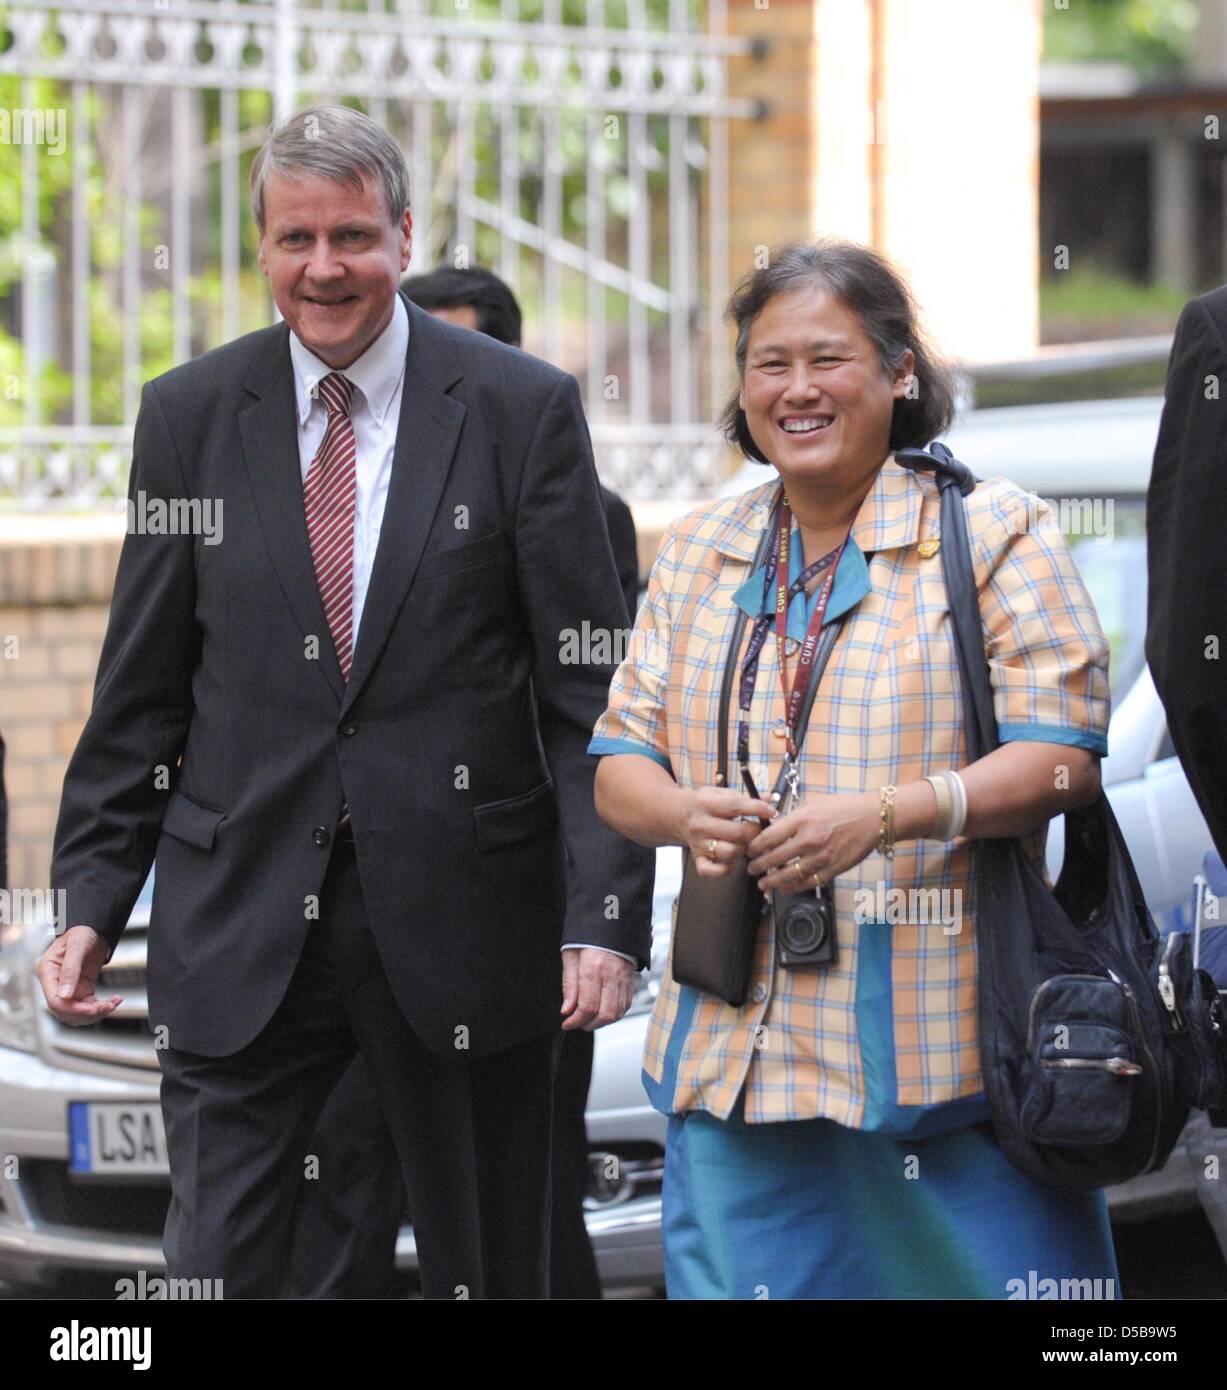 Thai Princess Maha Chakri Sirindhorn (R) is welcomed by Joerg Hacker (L), President of National Academy of Science Leopoldina, to Loepoldina adacemy in Halle Saale, Germany, 16 August 2010. The Princess informs herself on German education and research system as it is the Princess's main area in Thailand. After the visit to Leopoldina, Princess Maha Chakri Sirindhorn visits art muse Stock Photo